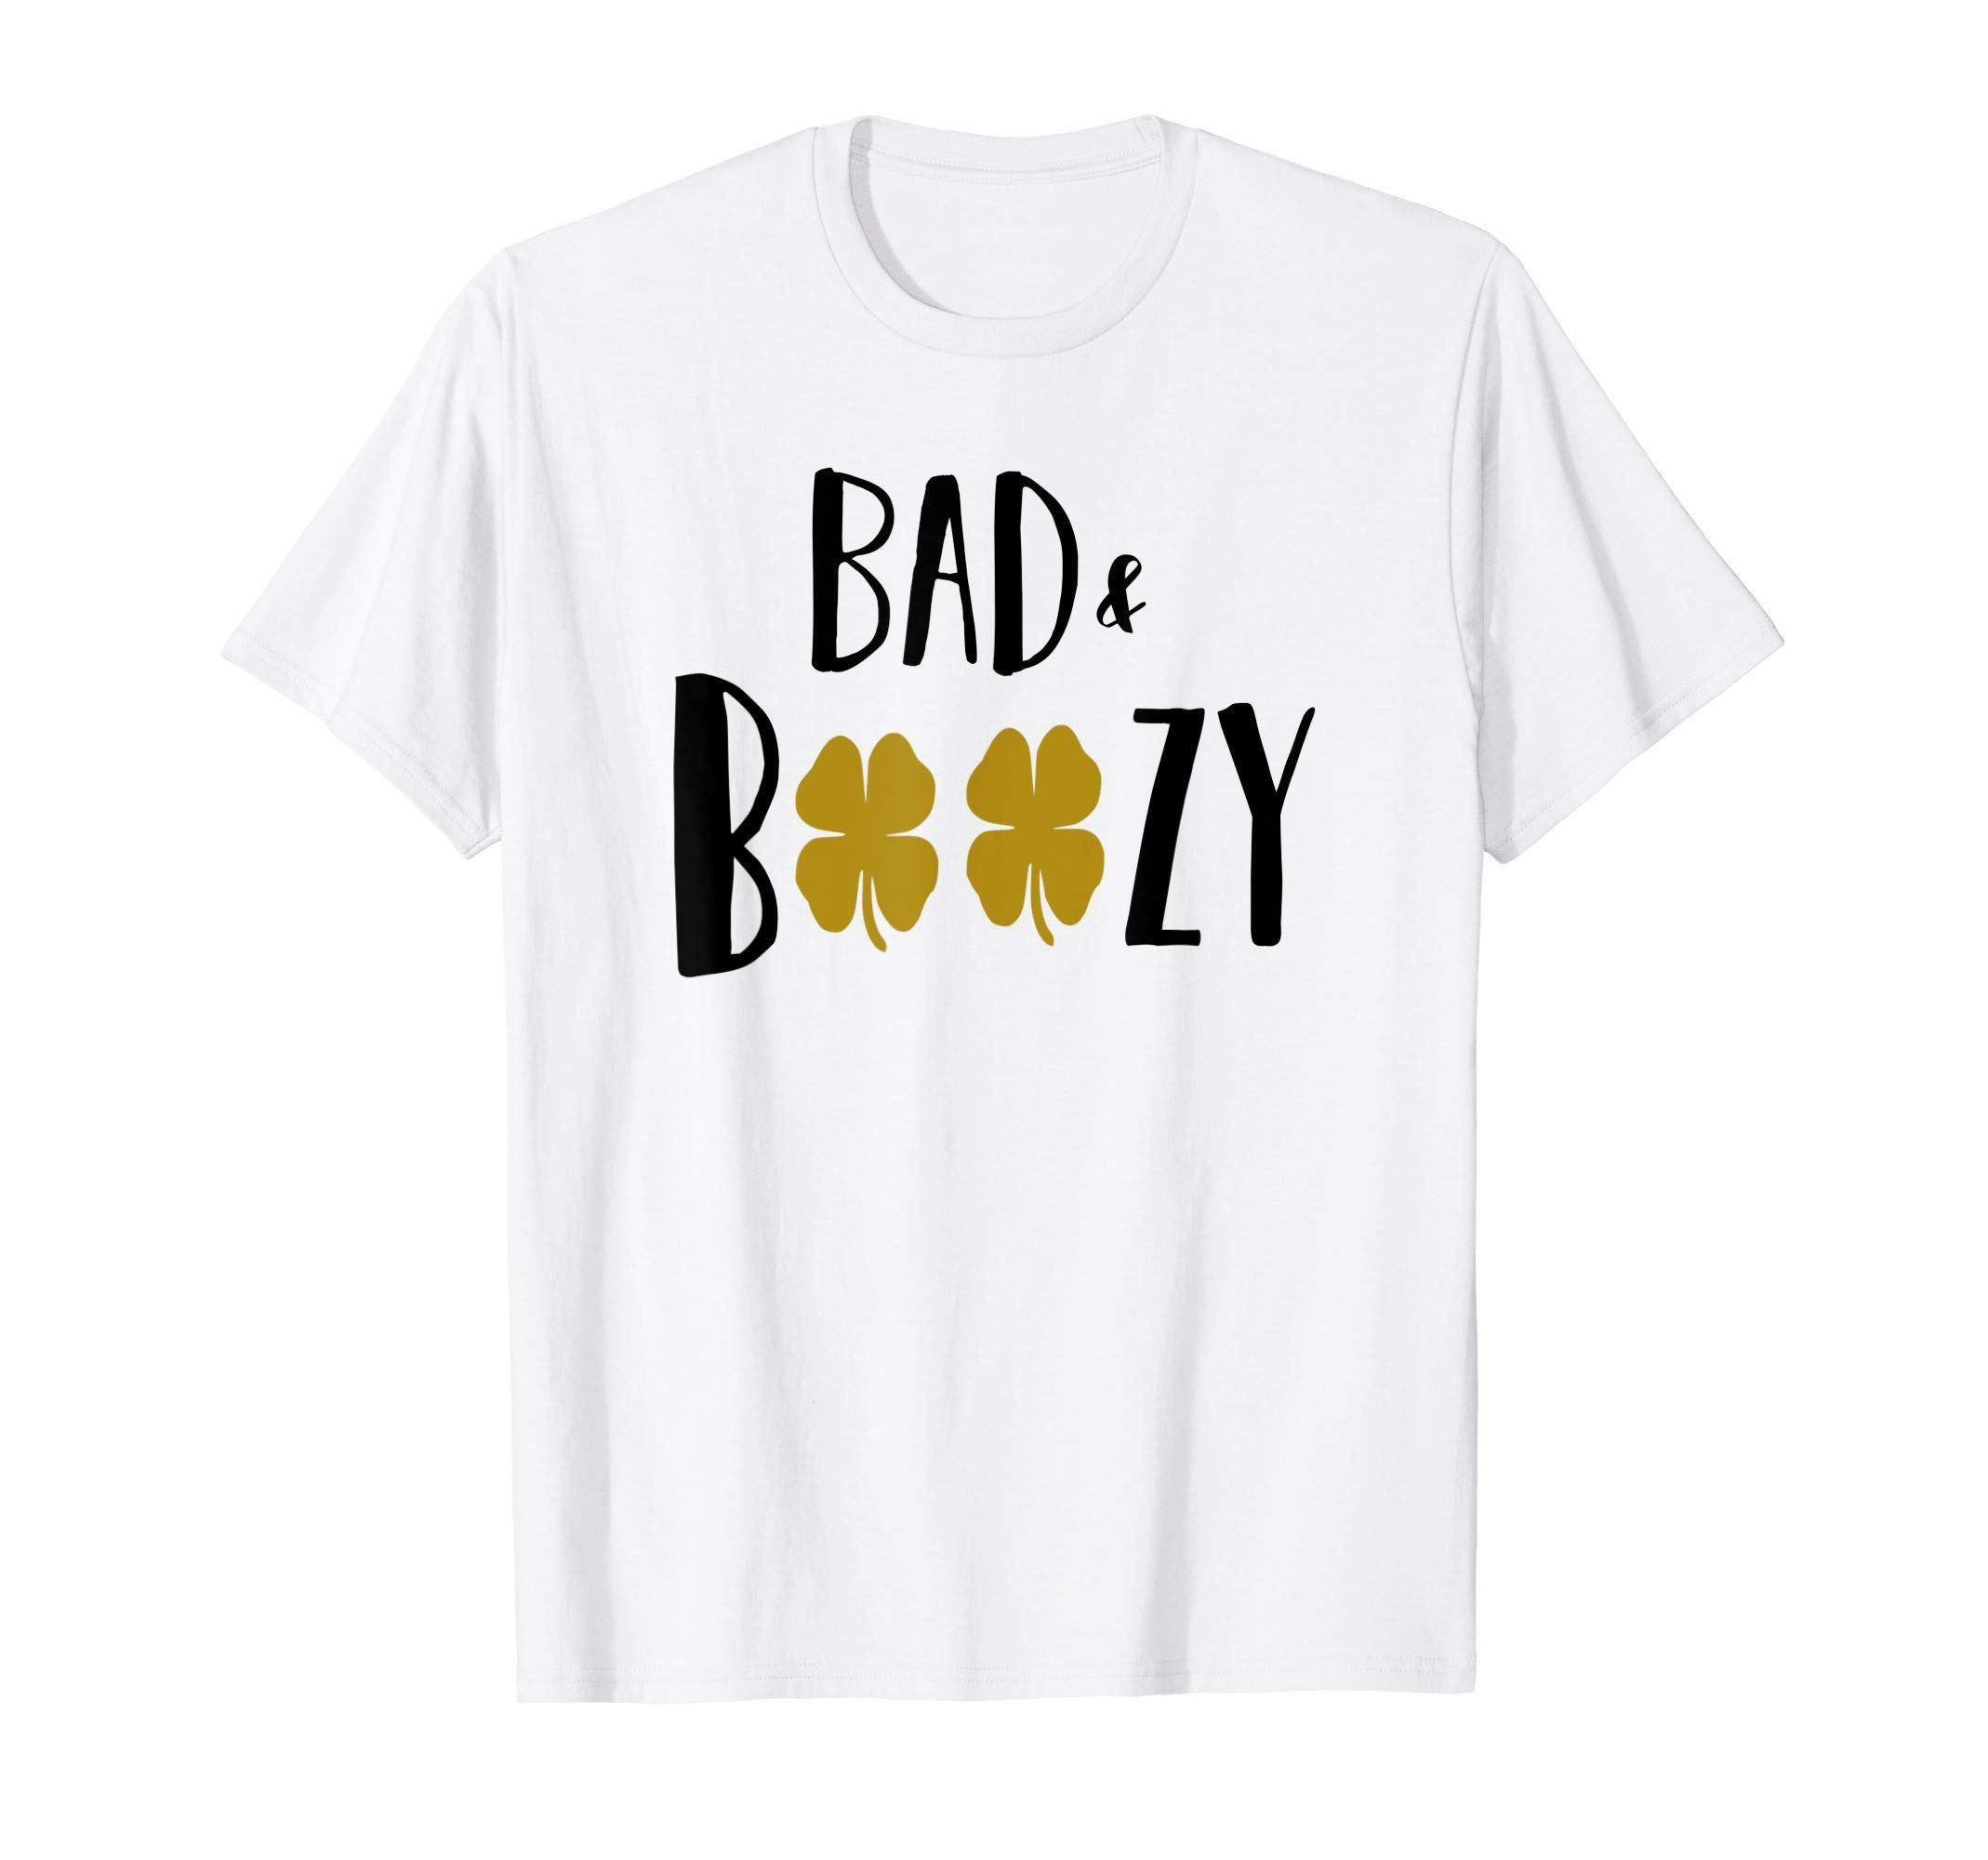 St Patrick's Day Drinking Quotes
 Bad and Boozy T Shirt Funny Saint Patrick Day Drinking